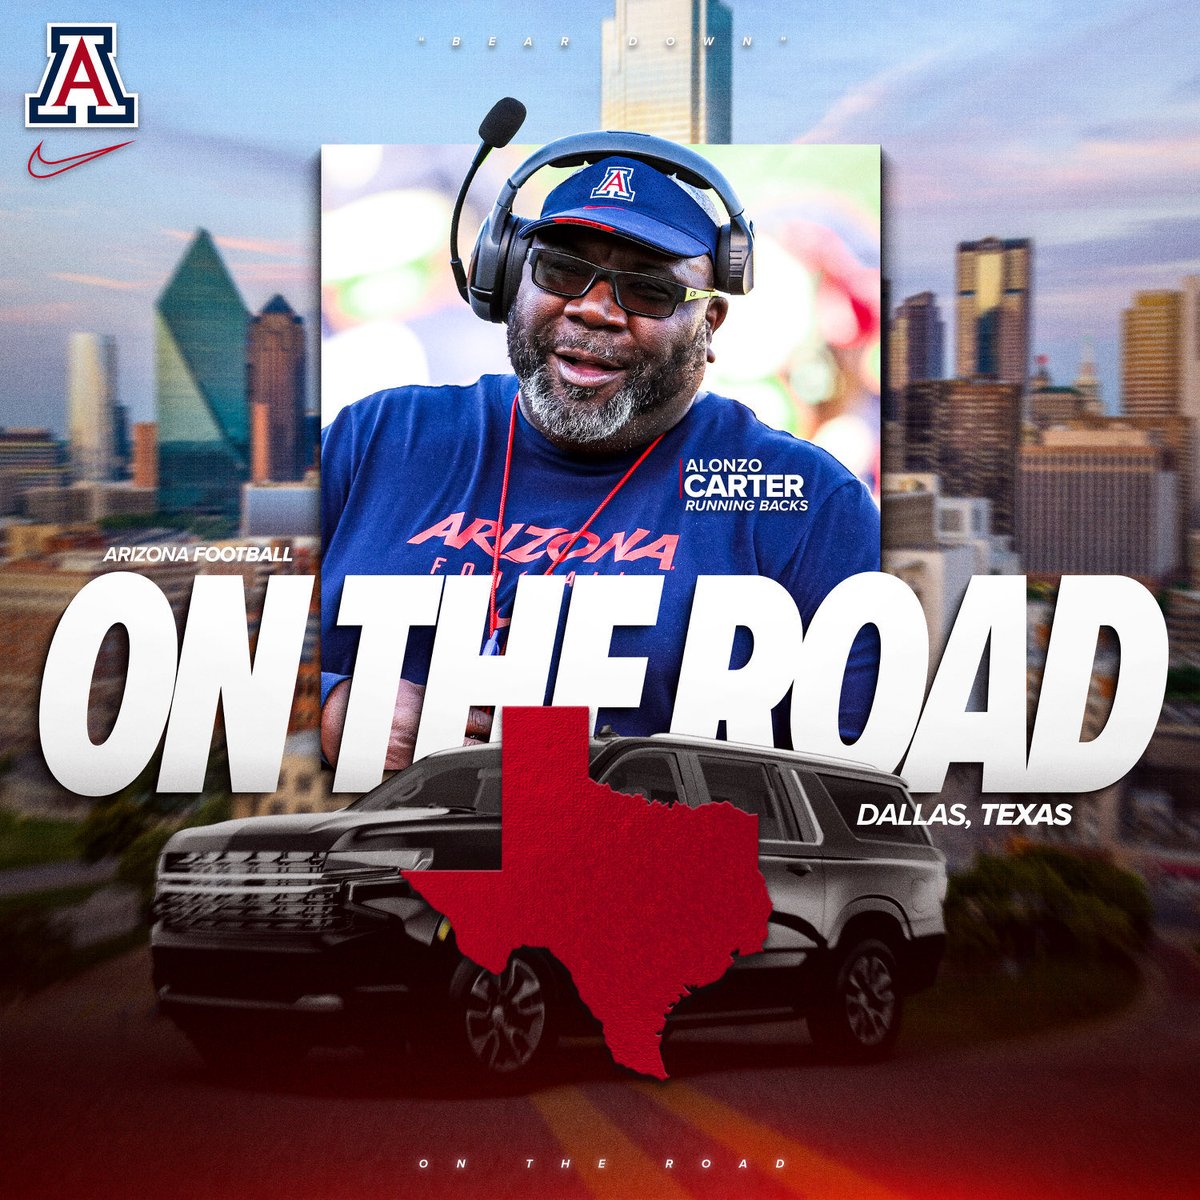 The Dynamic Duo ⁦@CoachBobbyWade⁩ & @RealCoachCarter “On The Road” in Dallas representing ⁦⁦@ArizonaFBall⁩ checking out some Ballers in Texas!!! #BearDown ⁦@Big12Conference⁩ 🔥 🔥